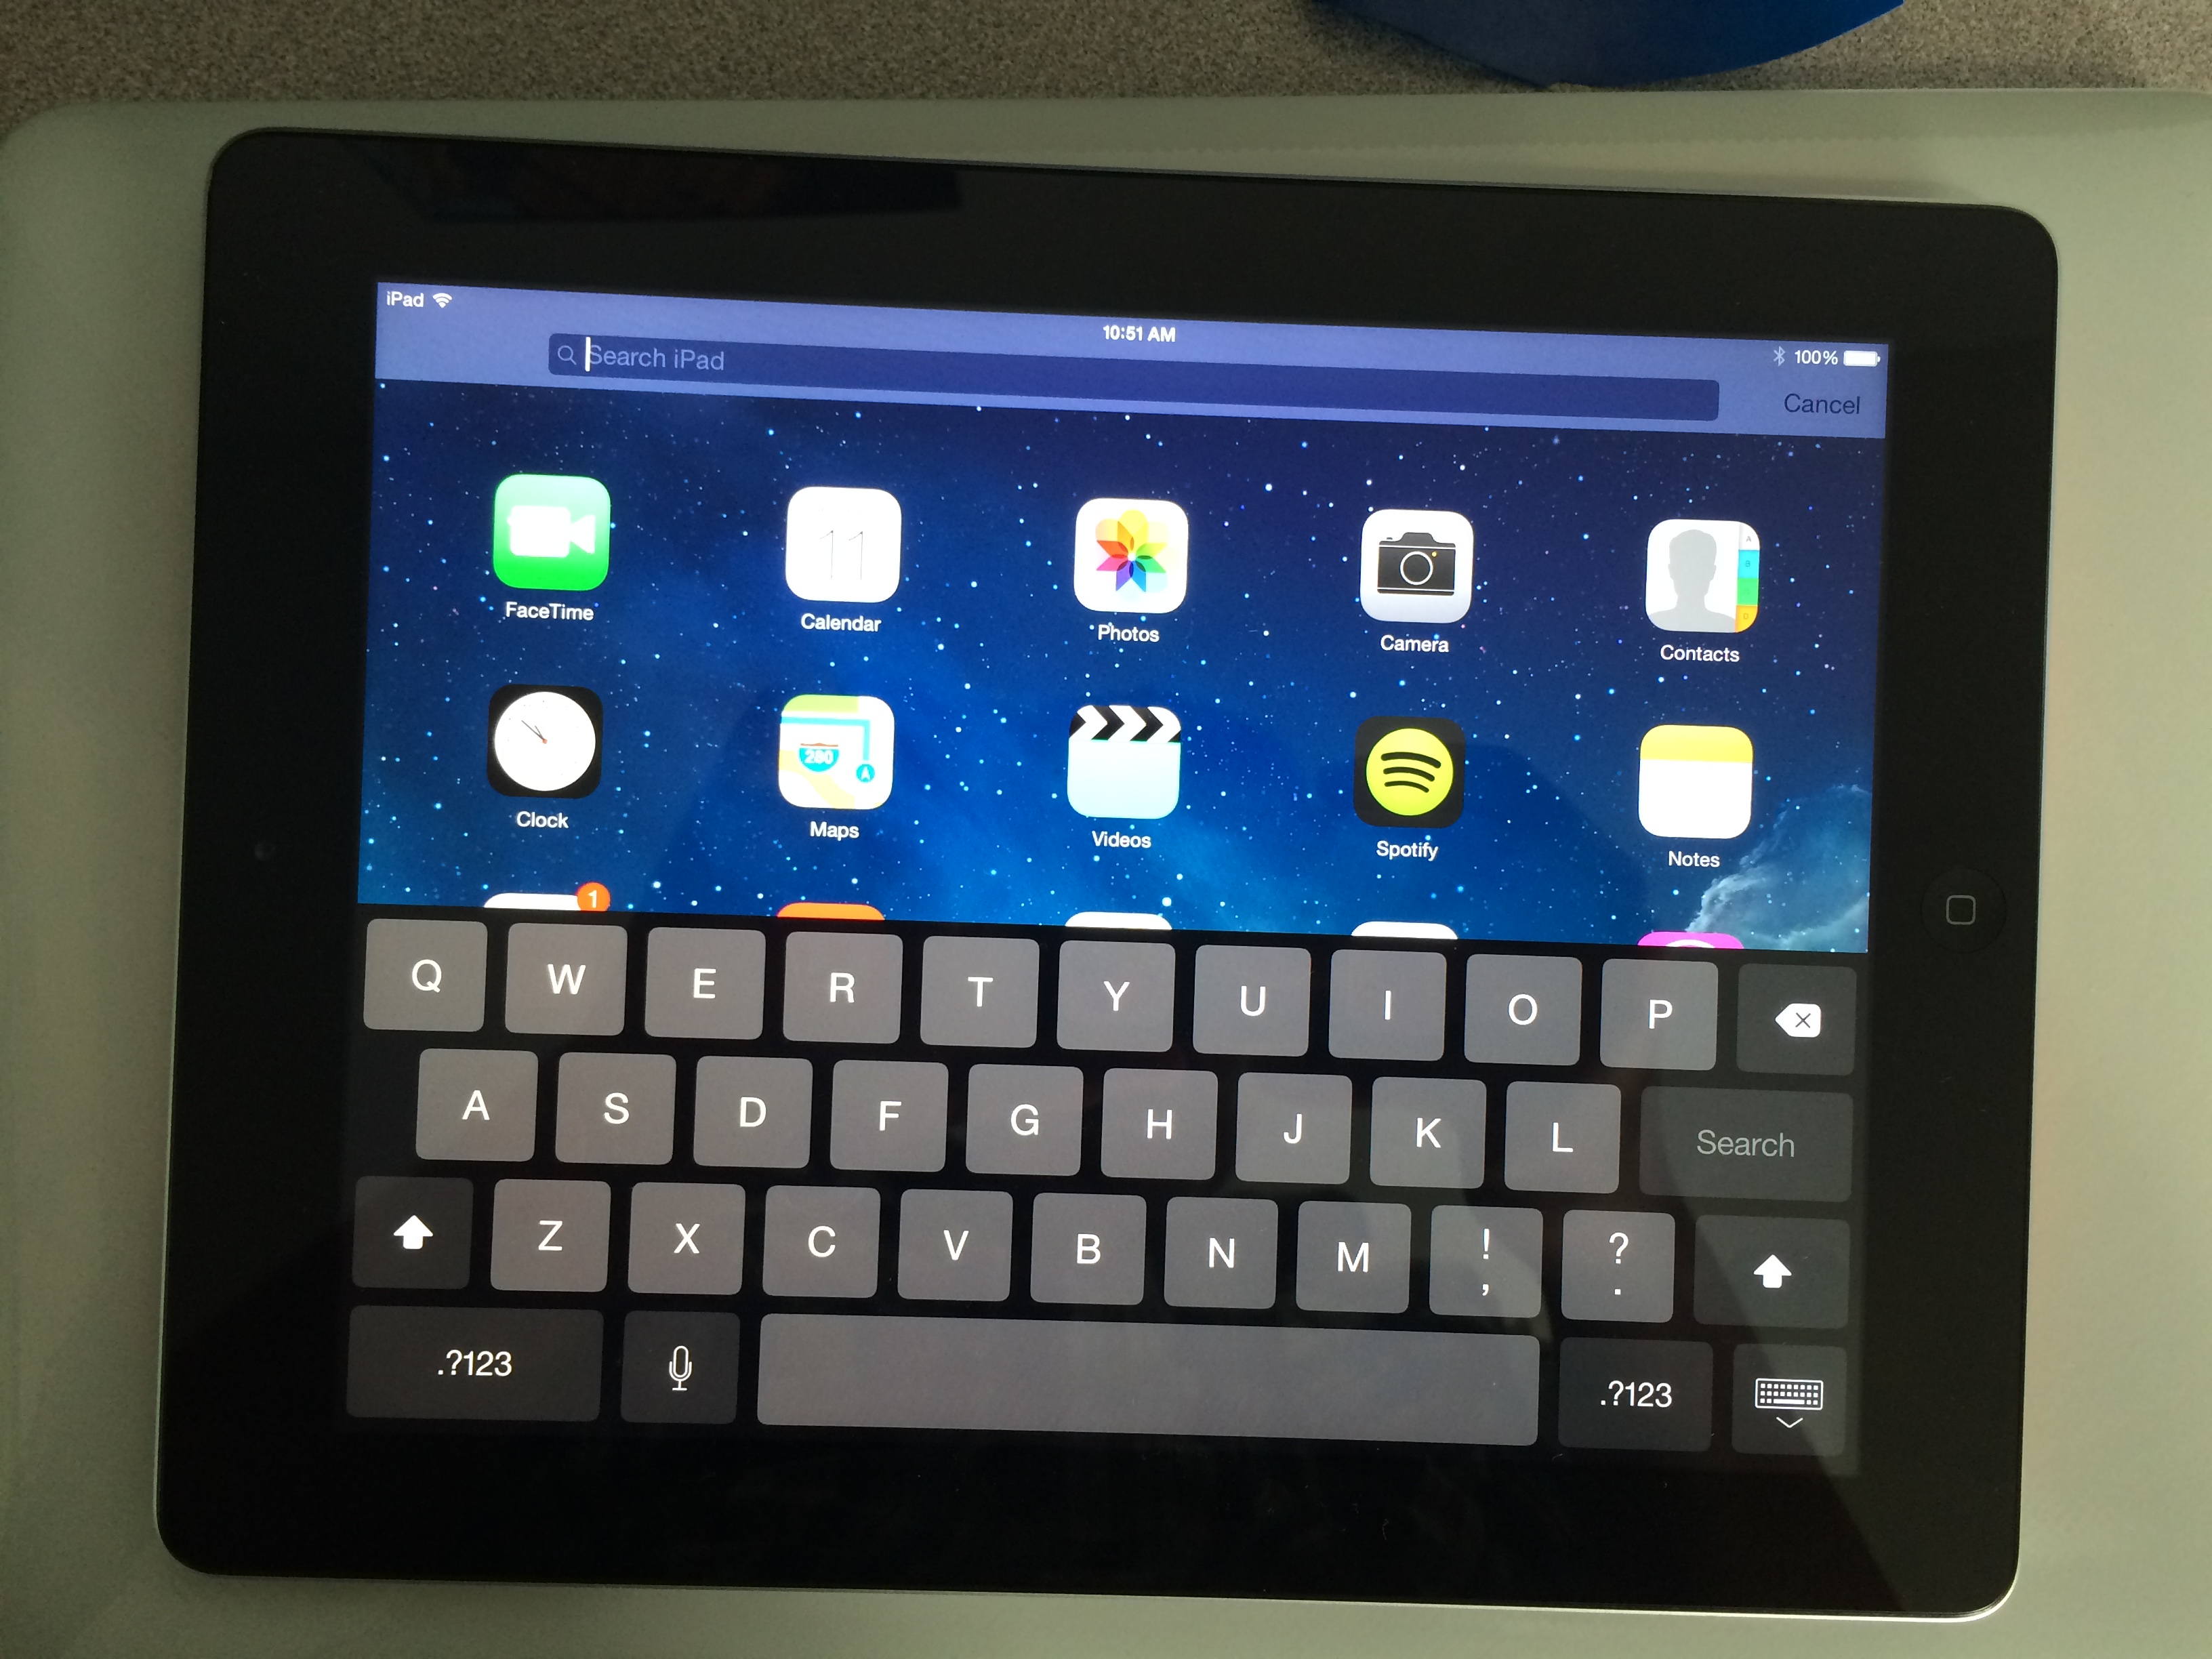 Read our iOS 7.1.2 review to see how this small update performs on the iPad 3.